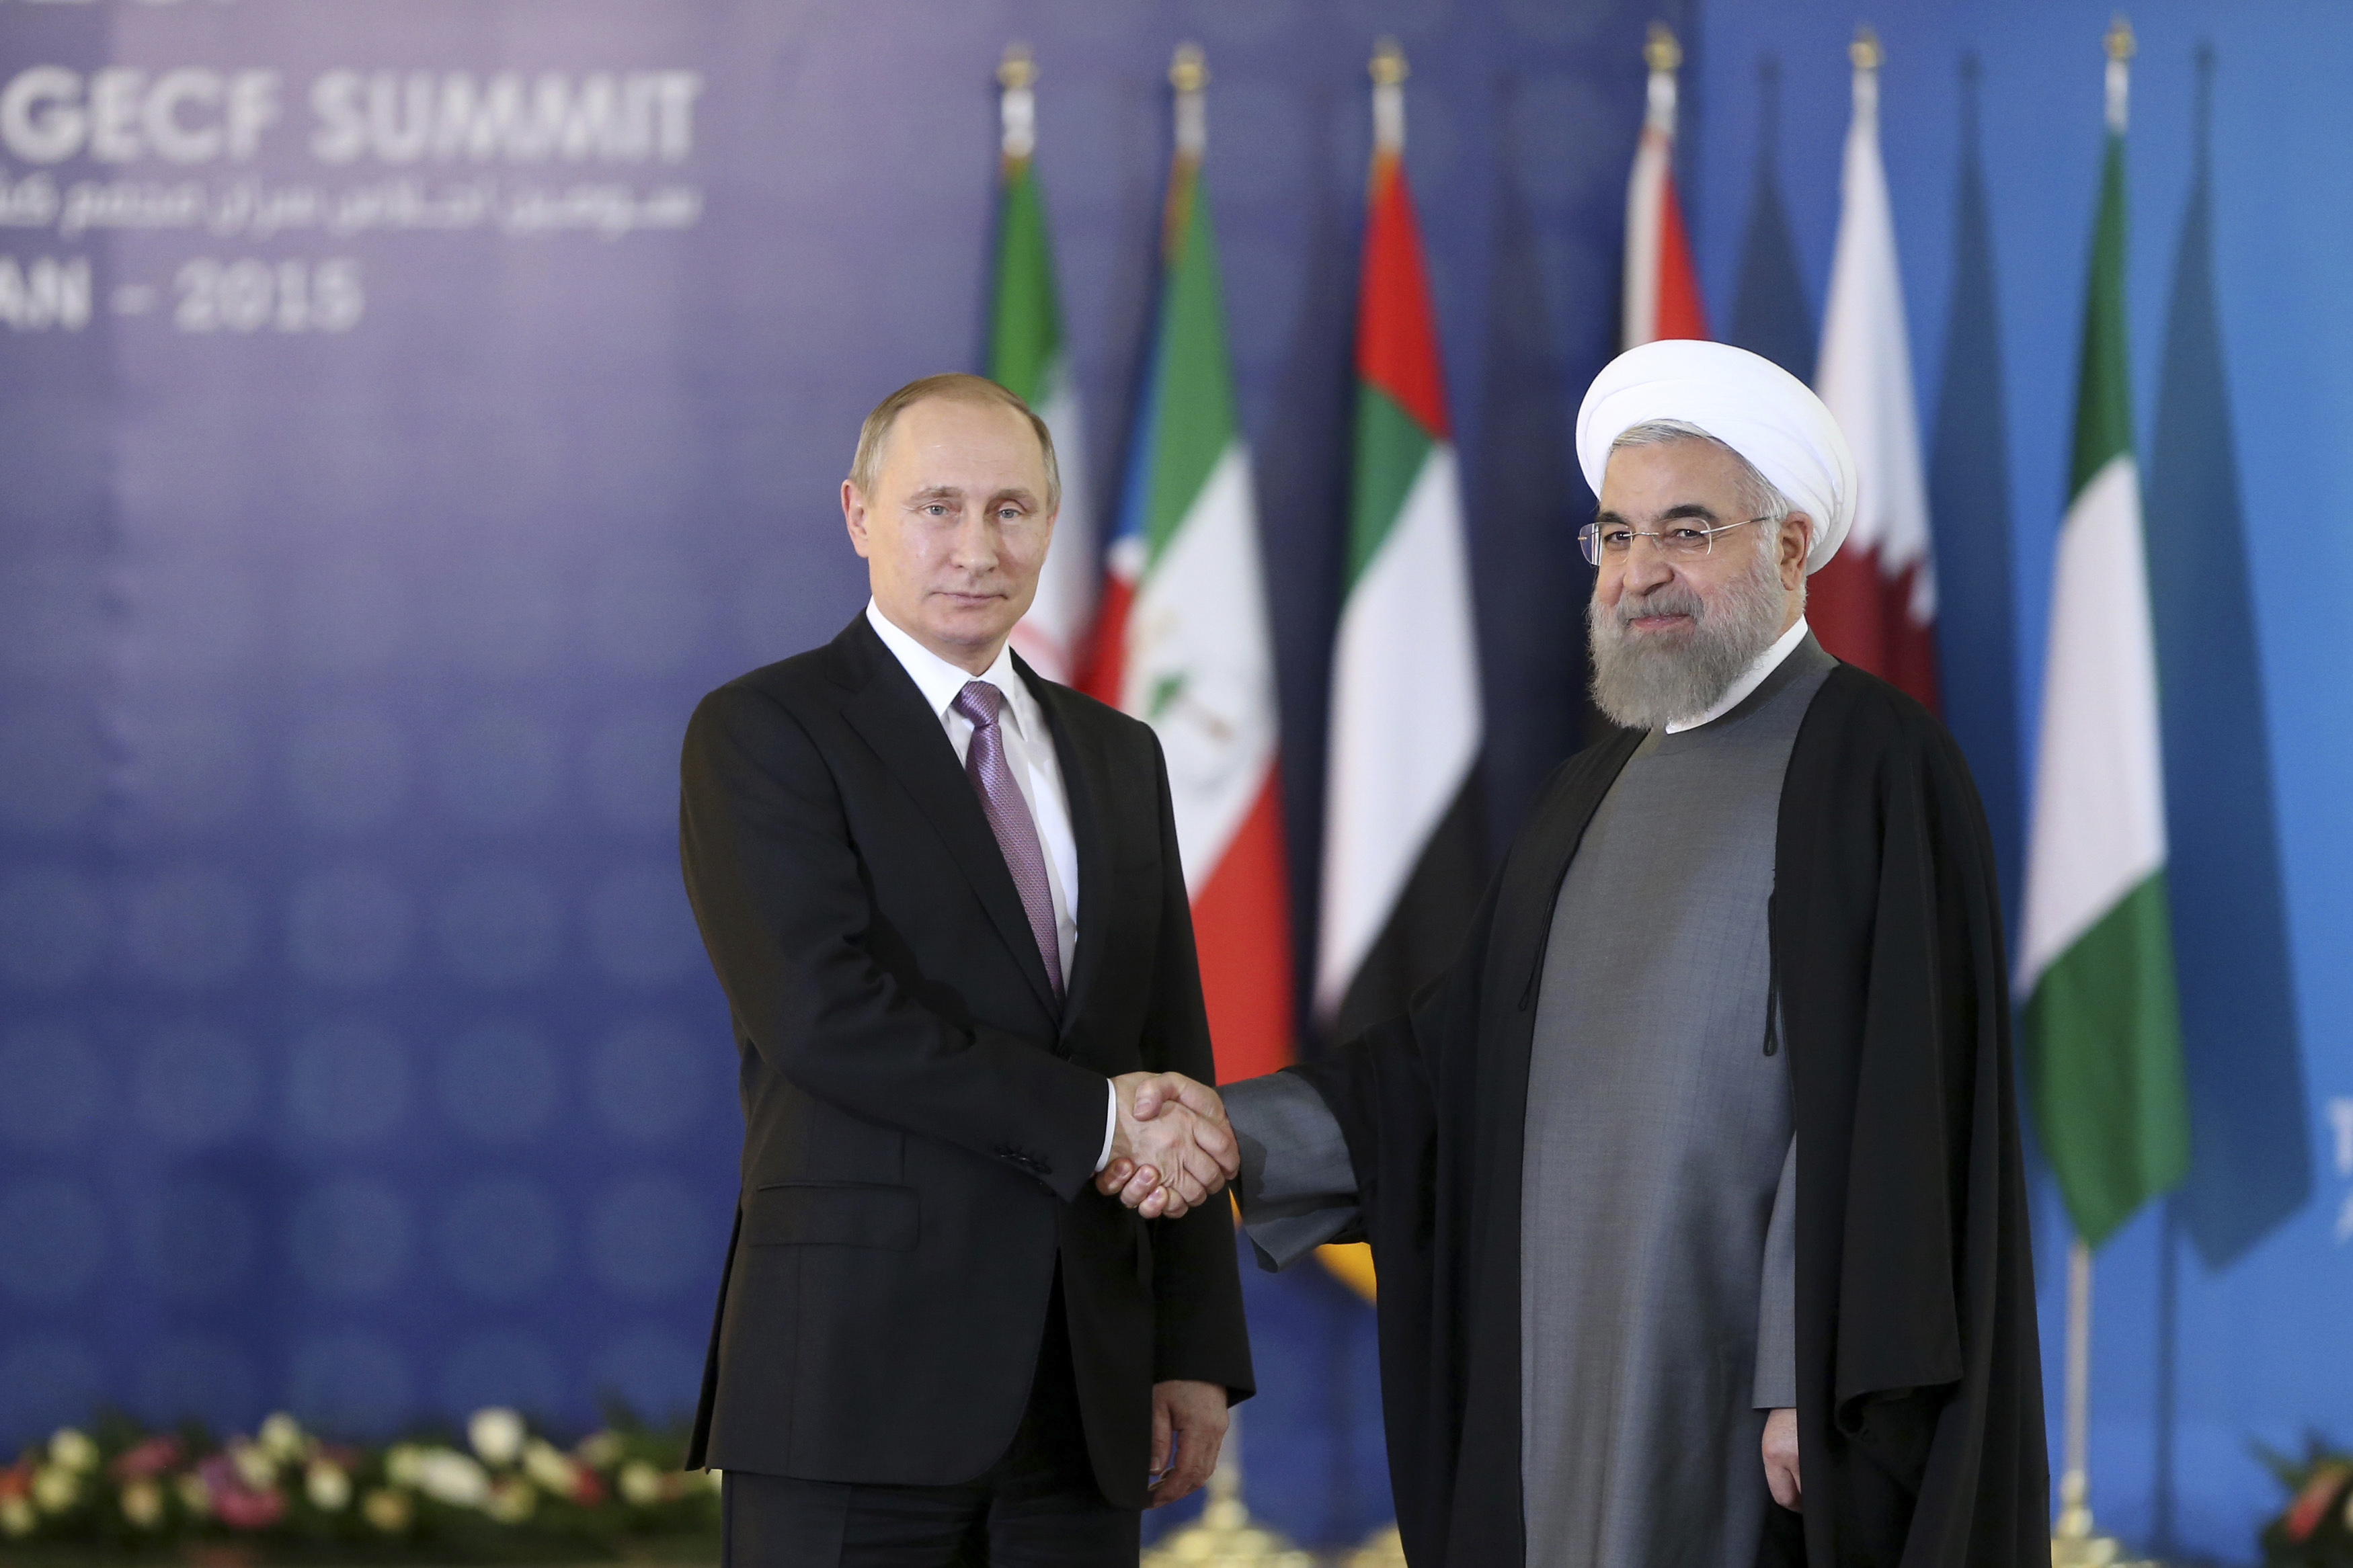 Russian President Vladimir Putin, left, shakes hands with his Iranian counterpart Hassan Rouhani at the Gas Exporting Countries Forum, GECF, summit meeting in Tehran, Iran, Monday, Nov. 23, 2015. (AP Photo/Ebrahim Noroozi)